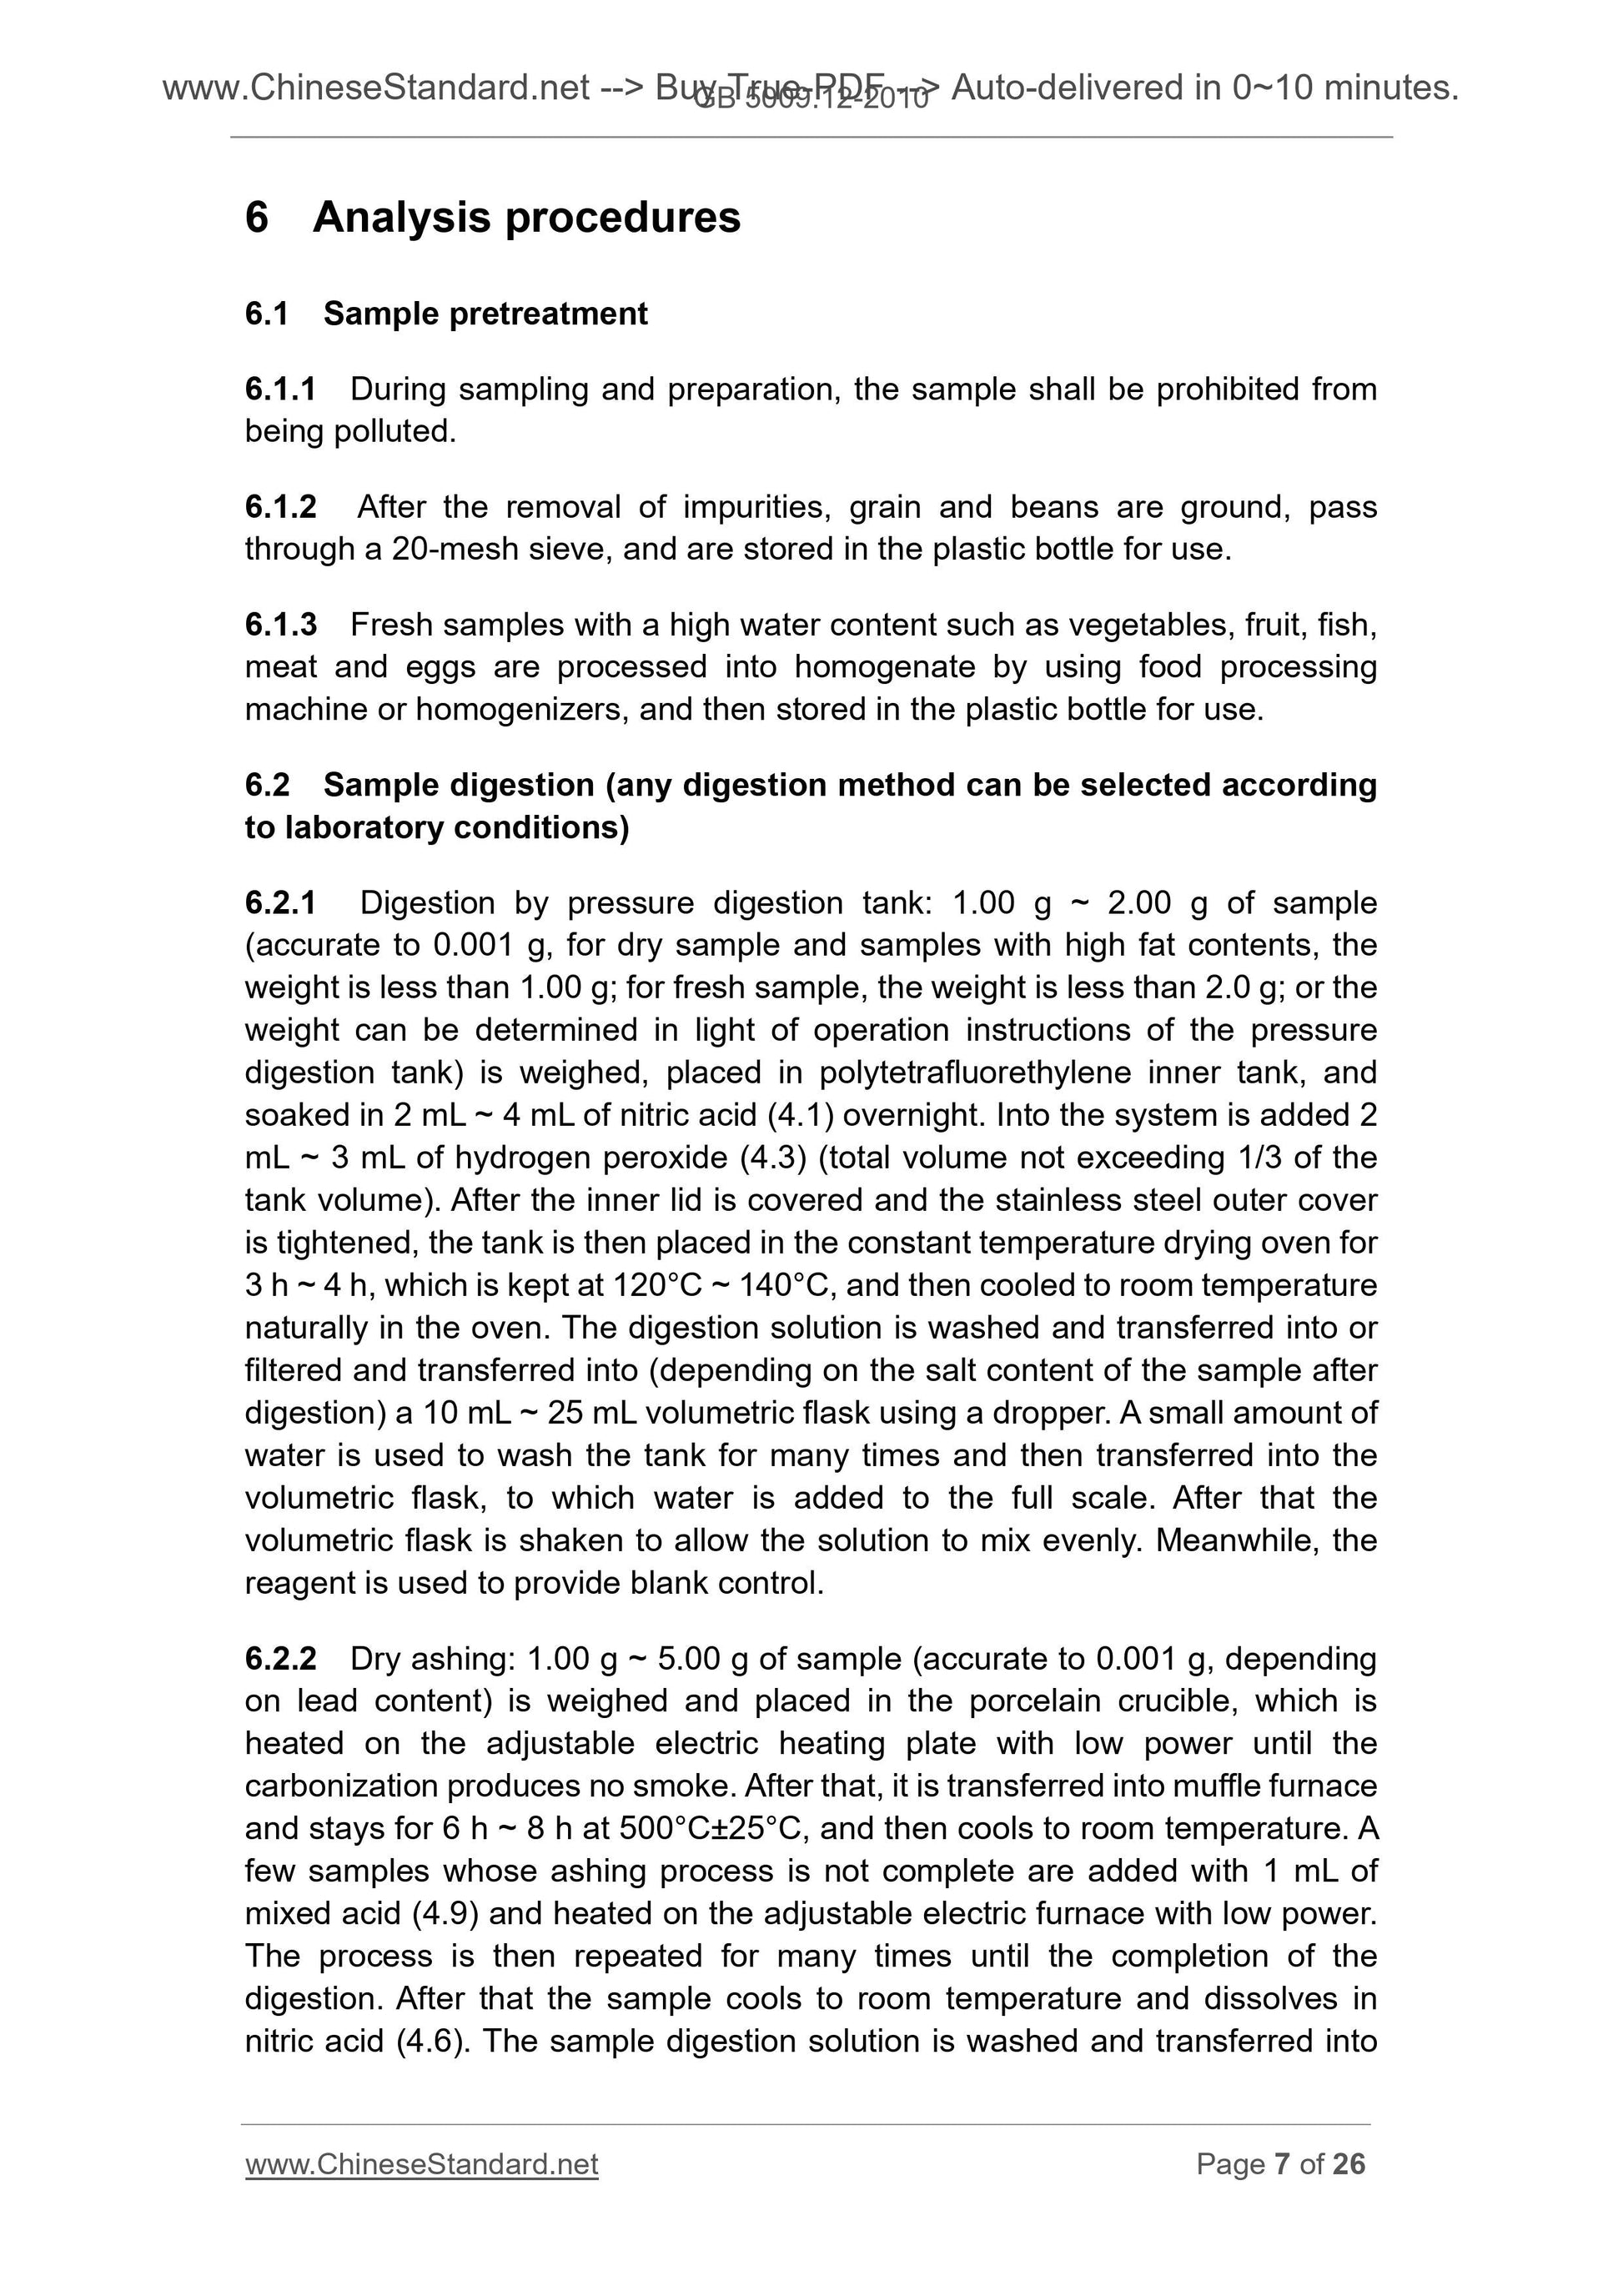 GB 5009.12-2010 Page 6